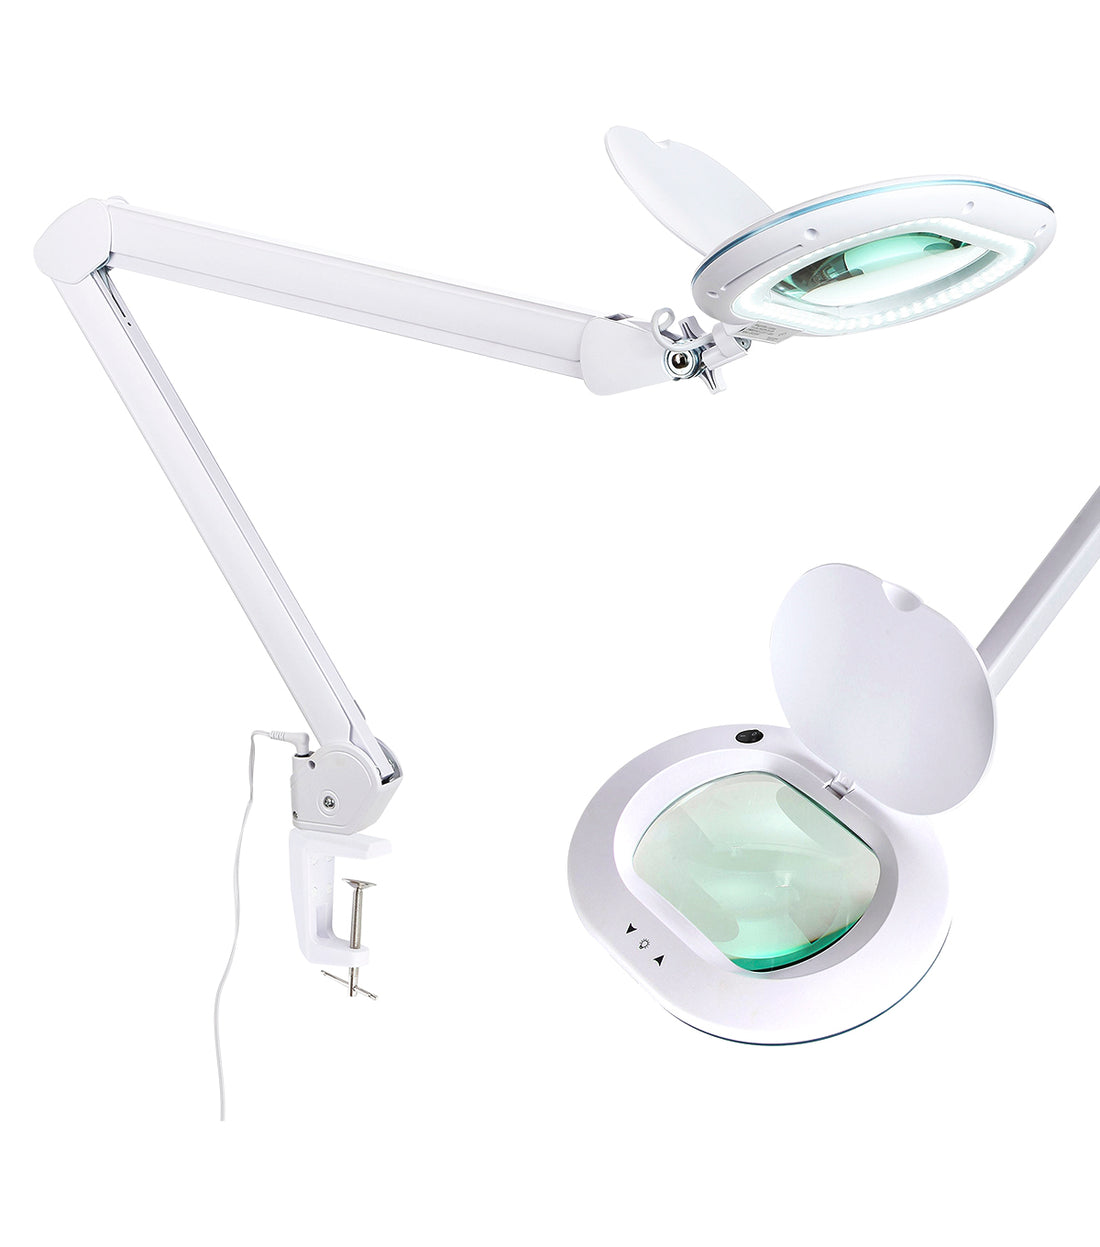 LED Magnifying Lamp with Clamp, 8-Diopter- 10X Glass Lens, 3 Color Modes,  Super